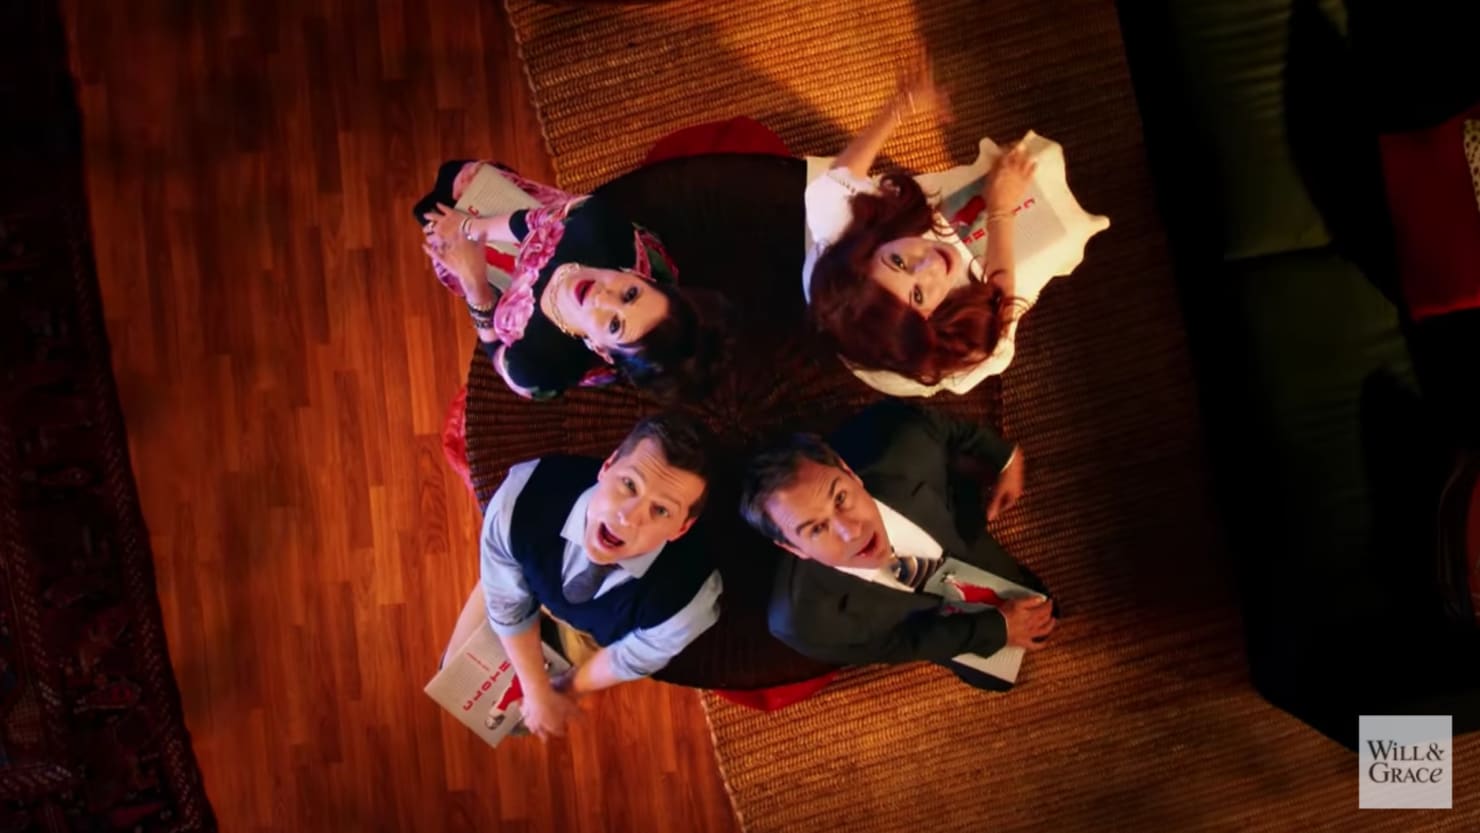 Watch: ‘Will and Grace’ Reboot Gets Musical Debut